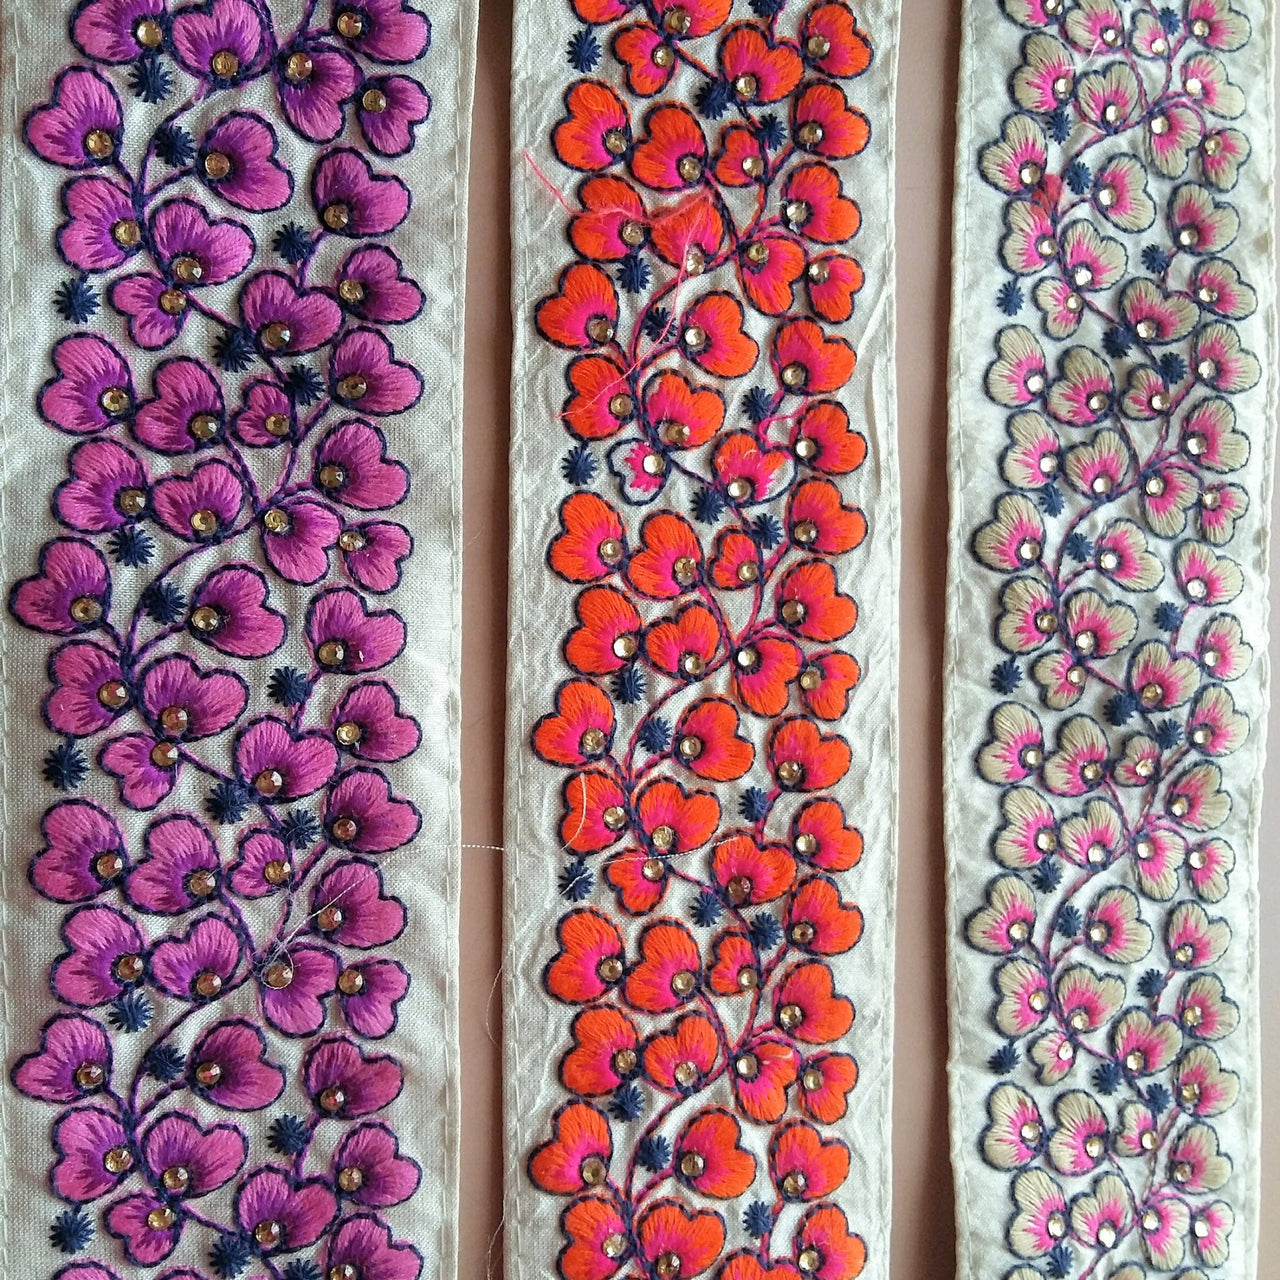 Beige Fabric Trim With Green / Orange / Fuchsia Pink Floral Embroidery, 58mm wide - 200317L454 / 55 / 56